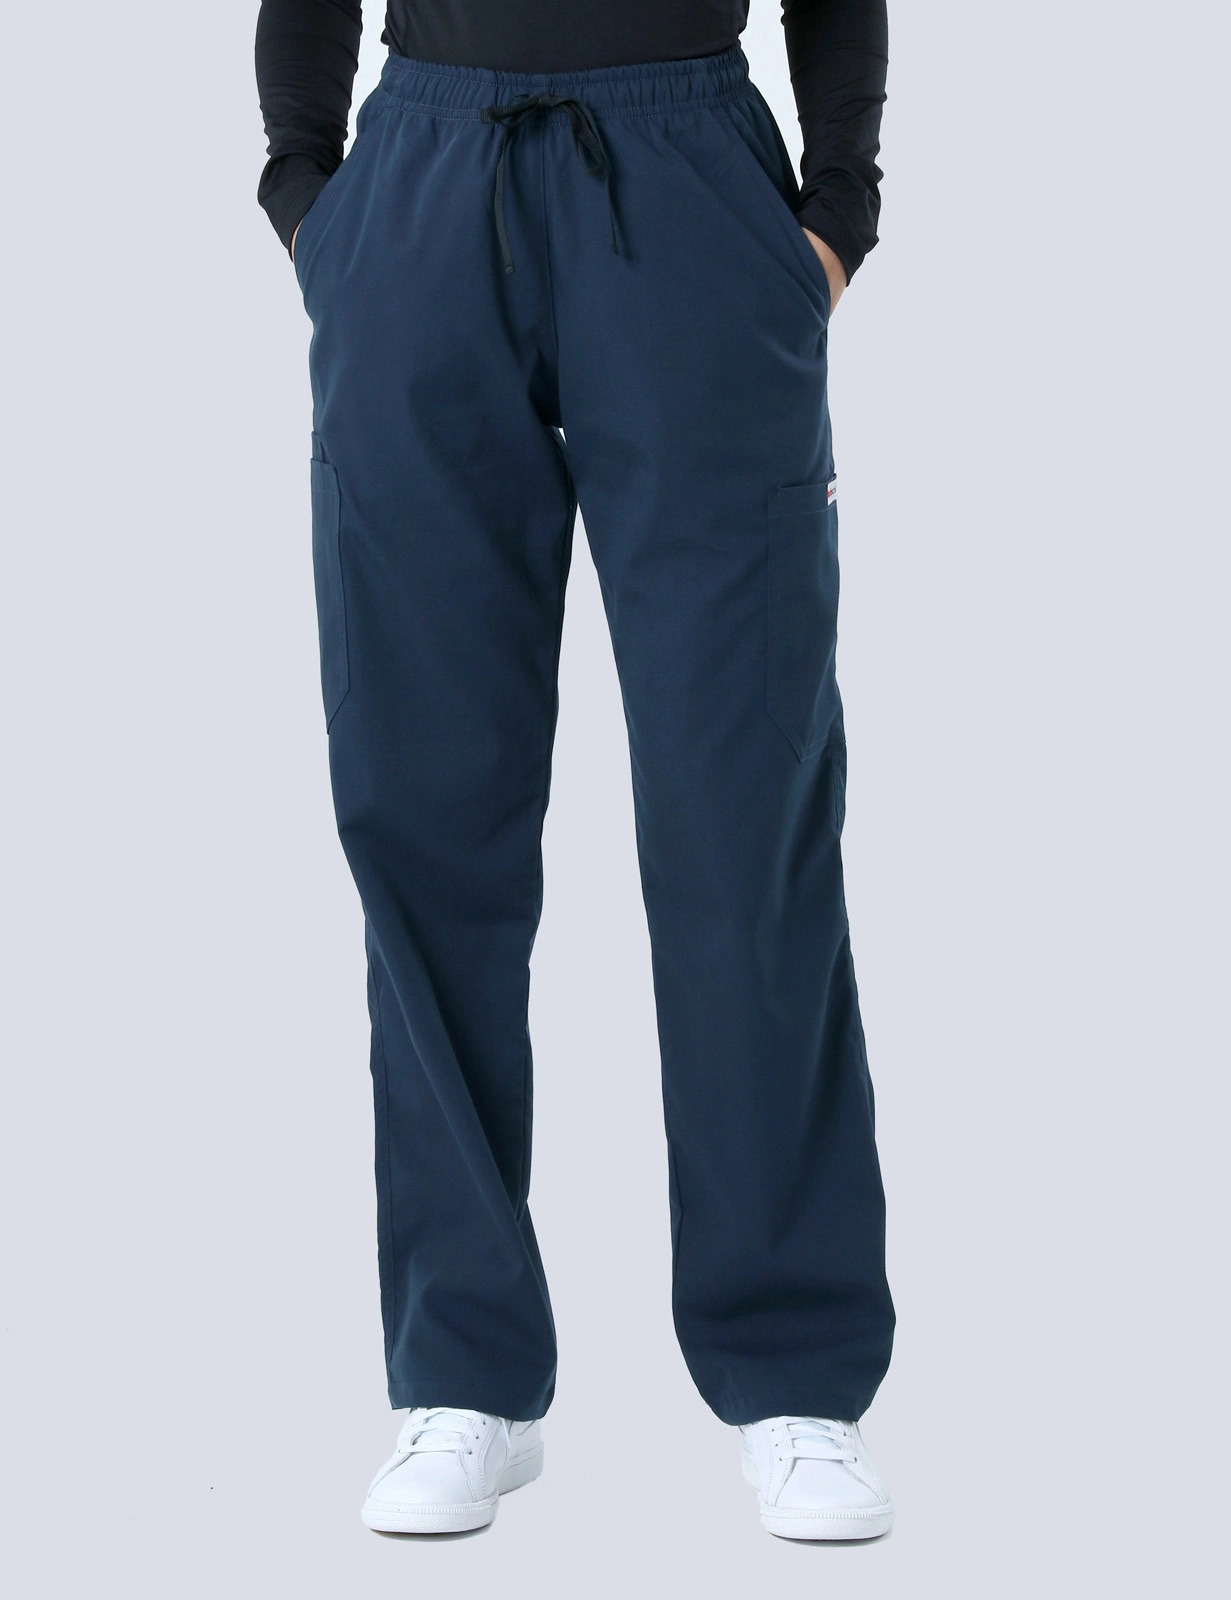 Canberra Hospital (ACT) - Acute Social Work (Contrast 4 Pkt in Navy with Steel Grey Trim (Sleeves and Inner pocket only) and Cargo Pants incl Logos)